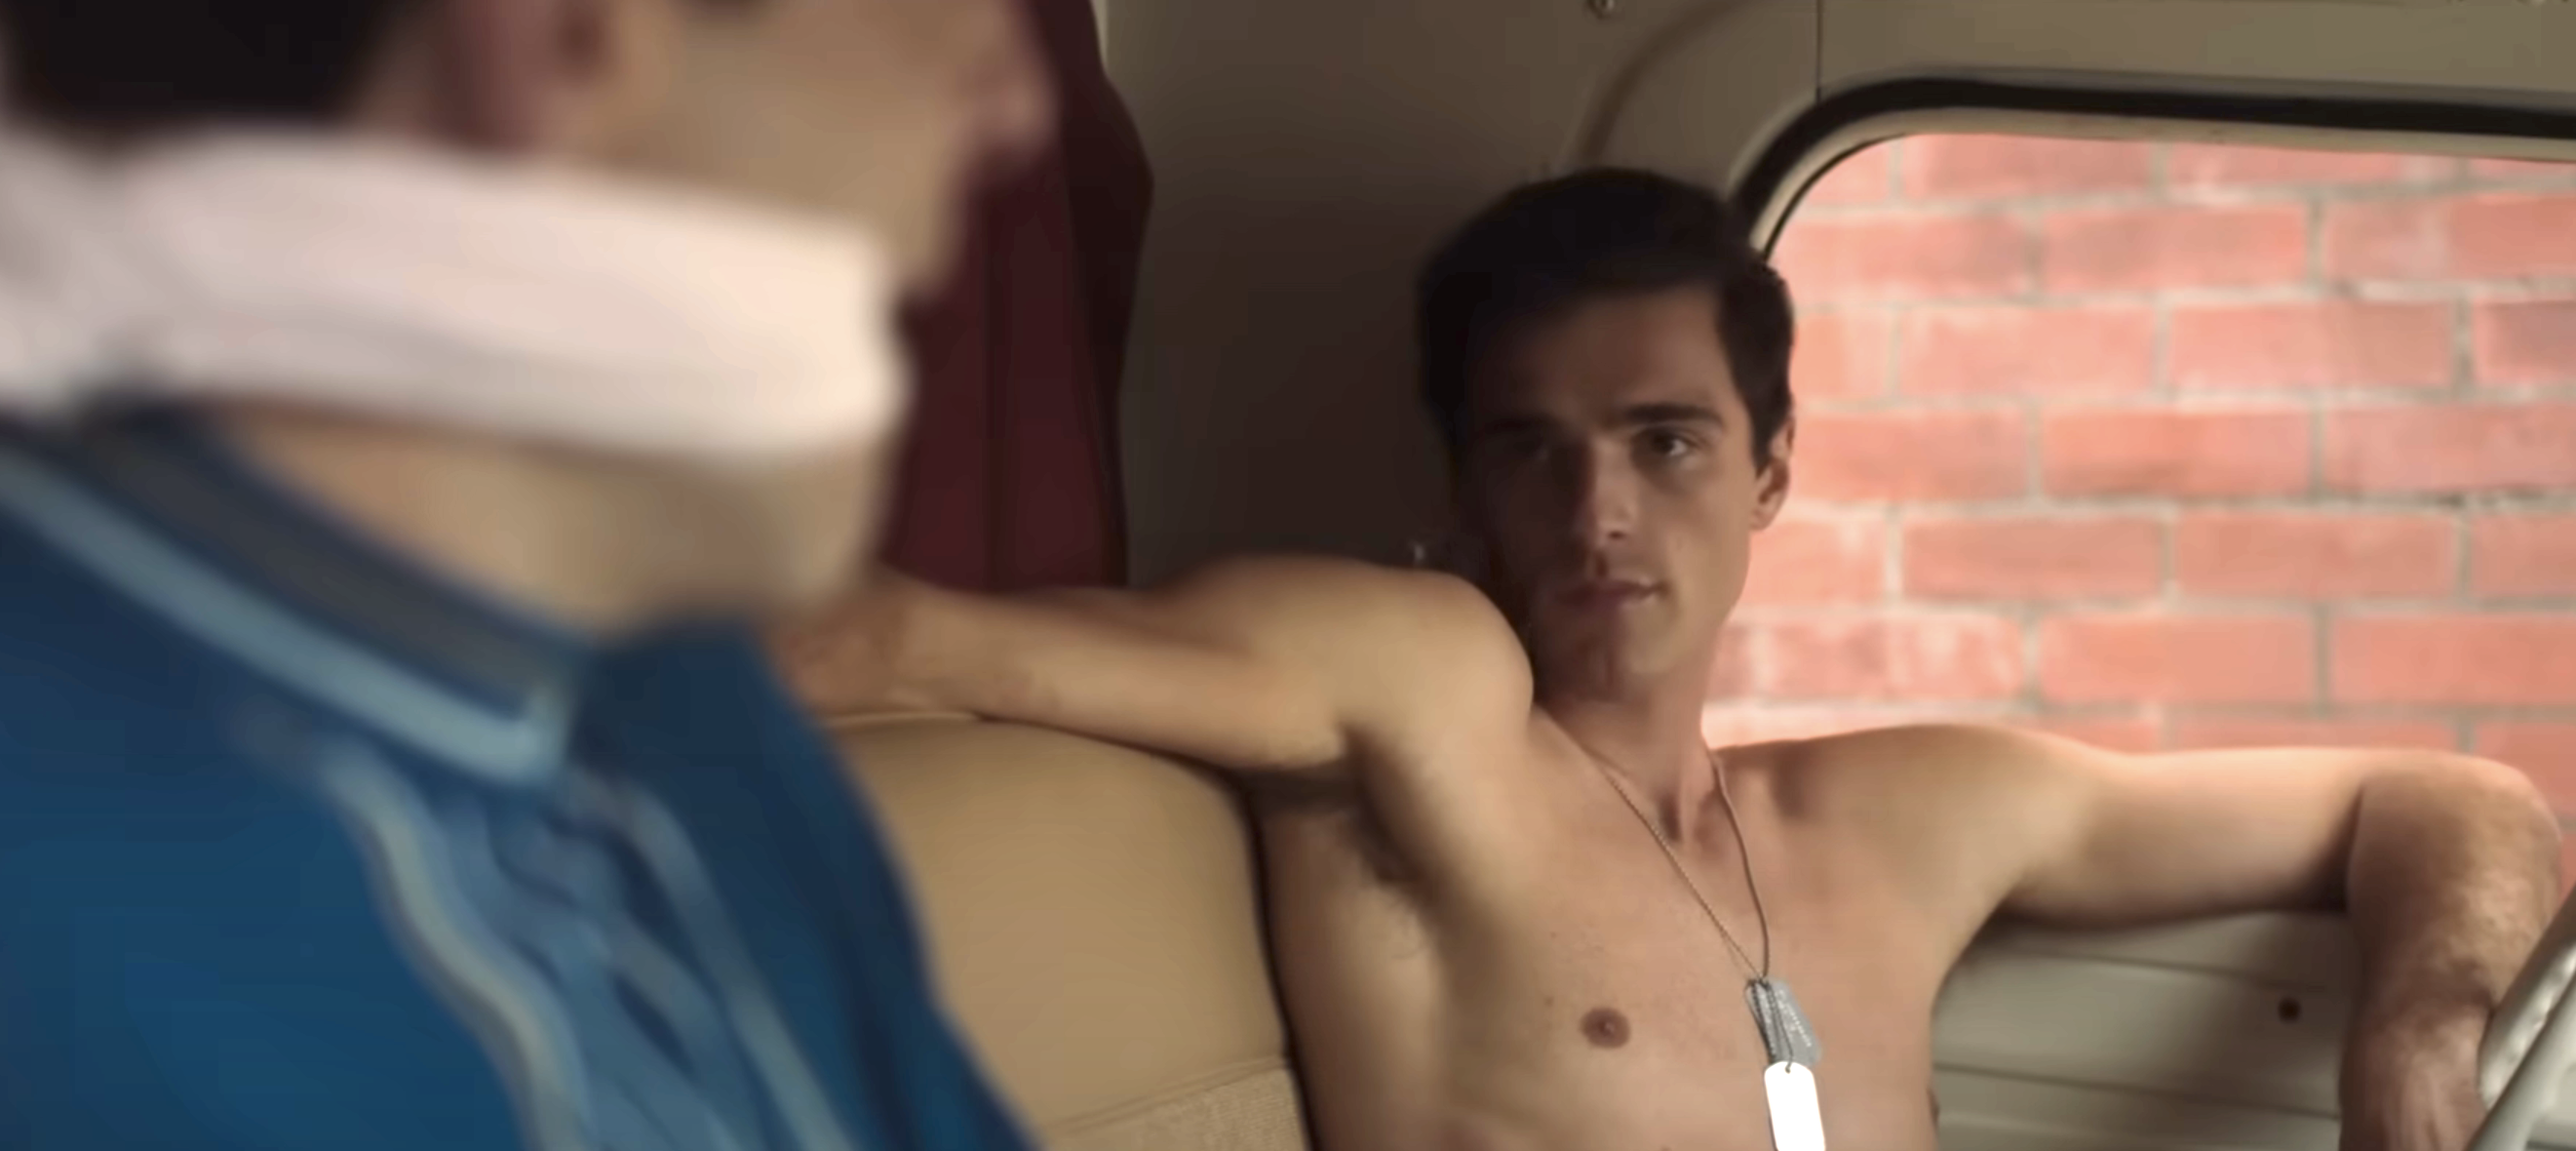 jacob&#x27;s character is shirtless in a car sitting next to someone he&#x27;s gagged